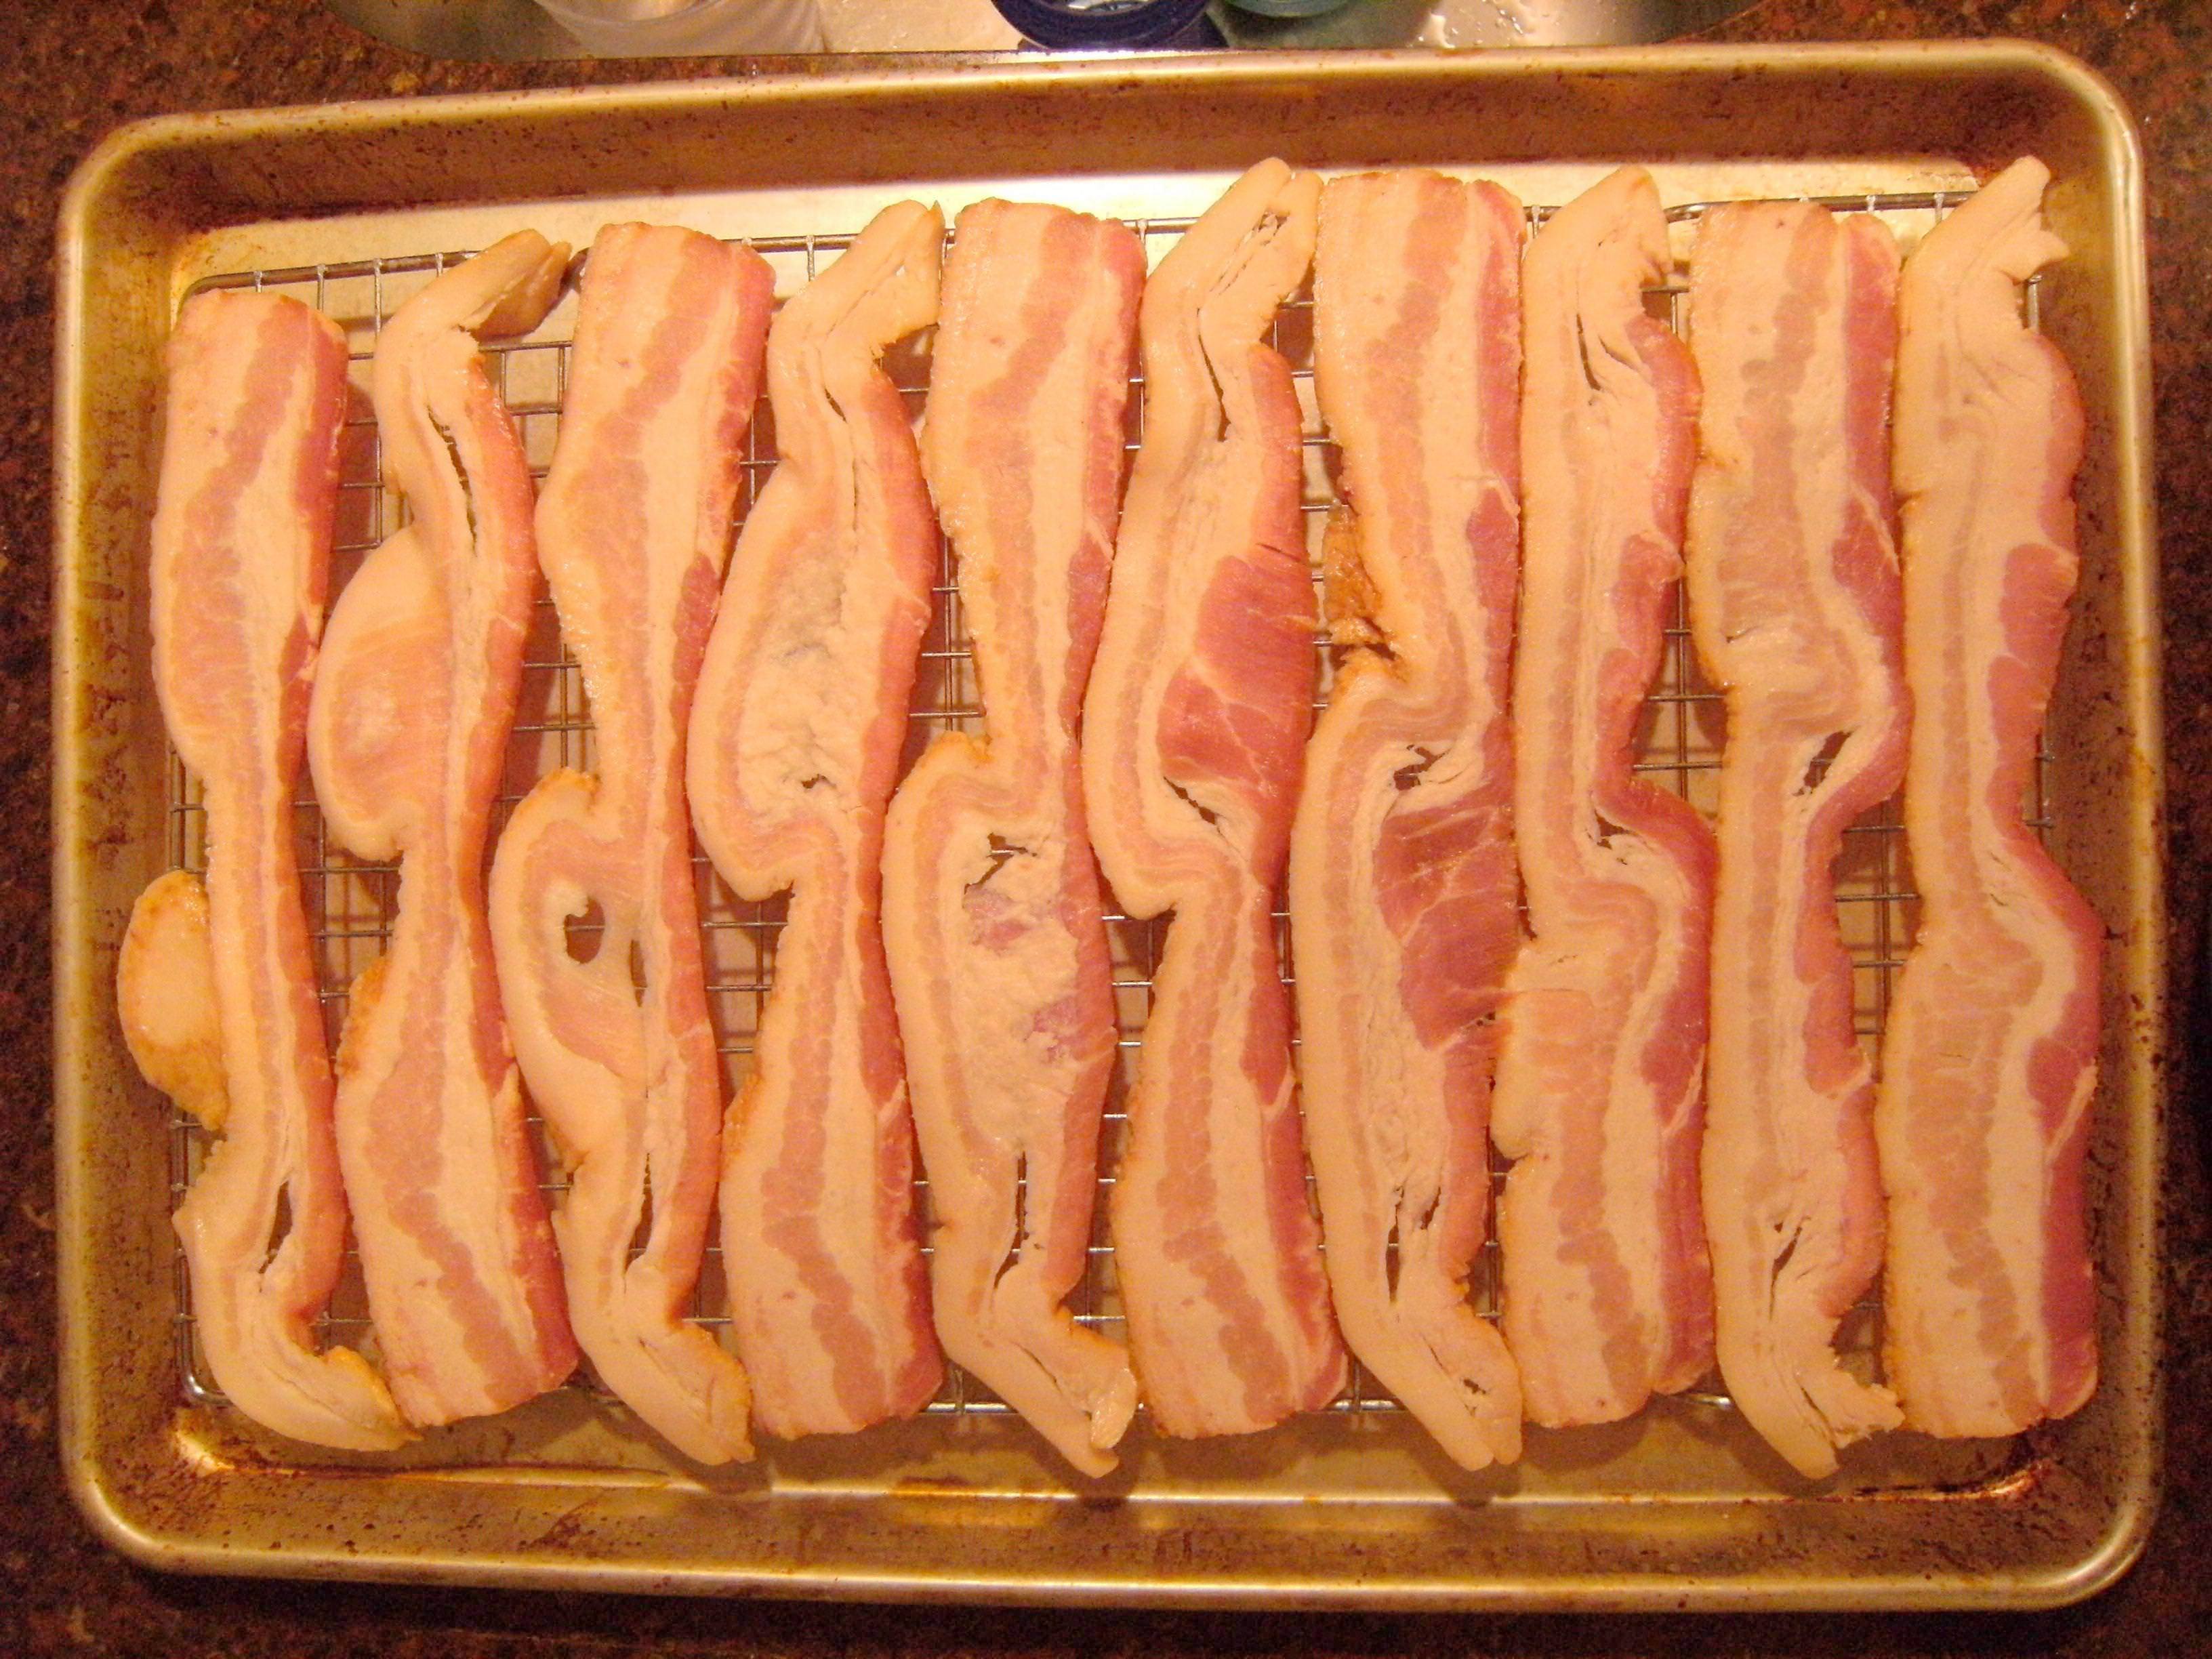 Oven Cooked Bacon - Learn how to make it at ComfortablyDomestic.com